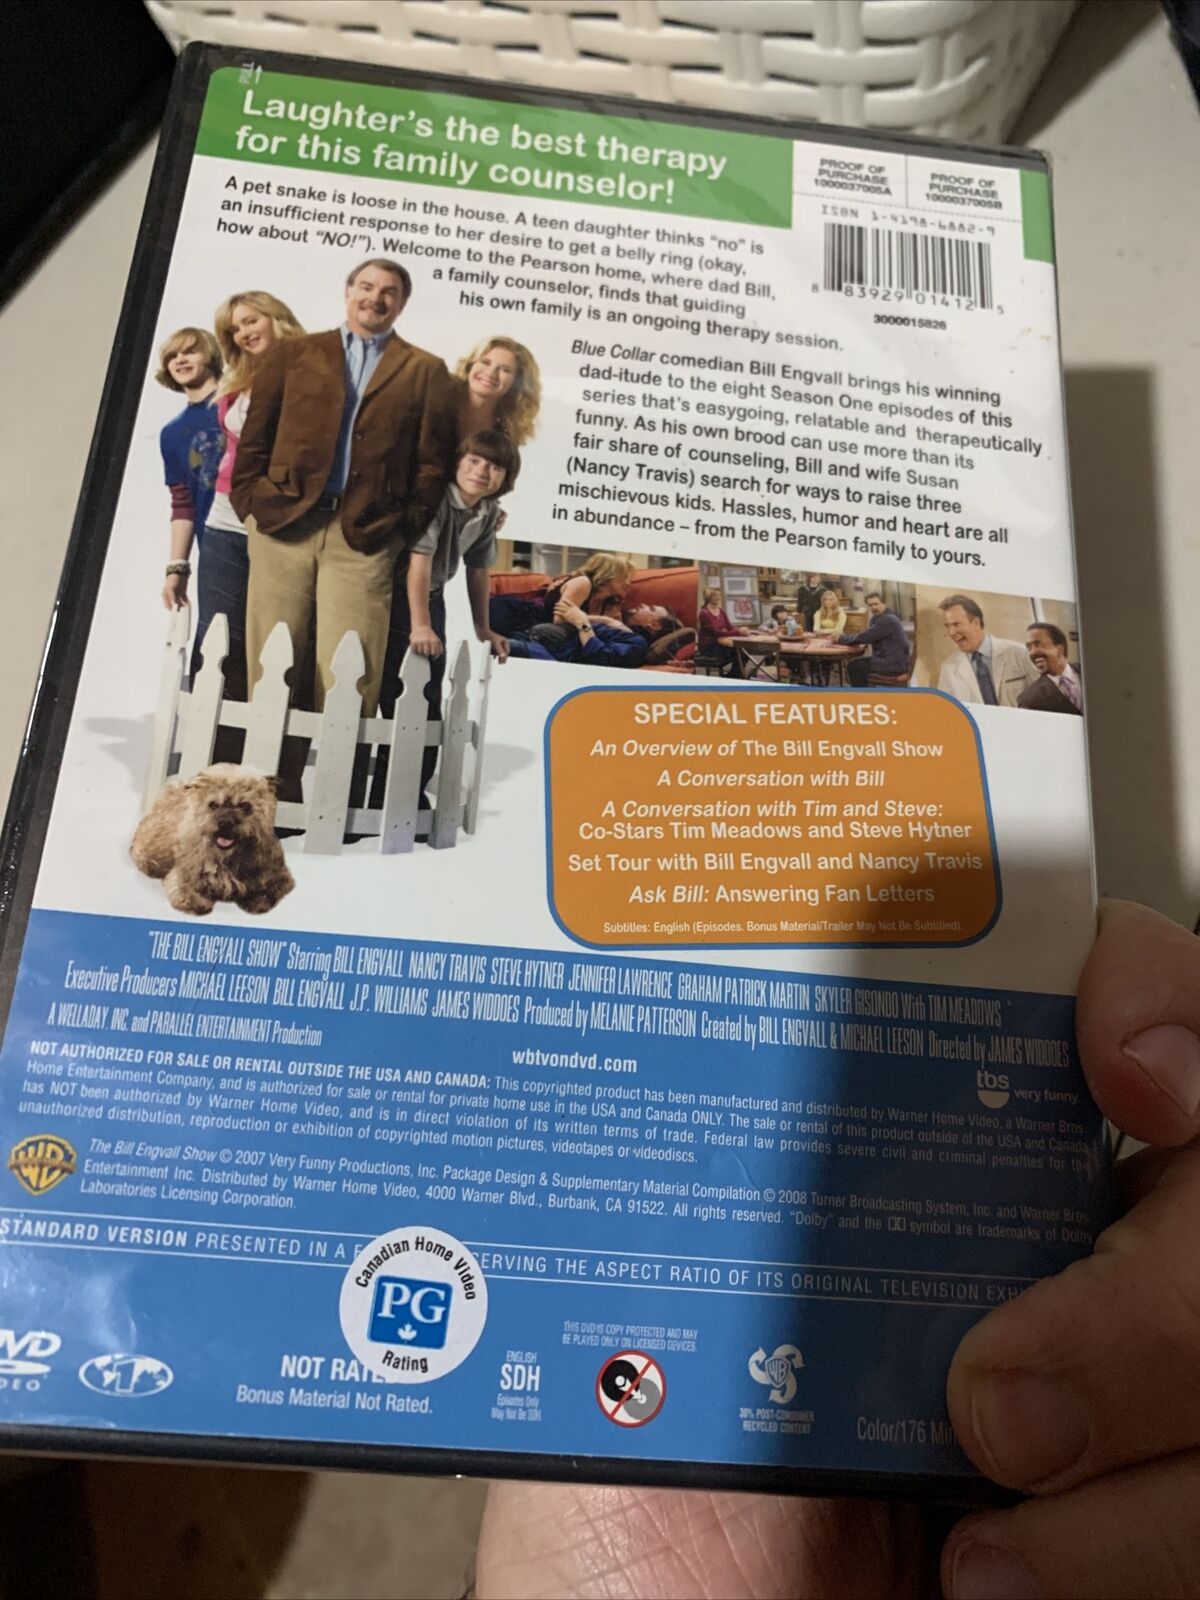 Bill Engvall Show - The Complete First Season (DVD, 2008, 2-Disc Set)